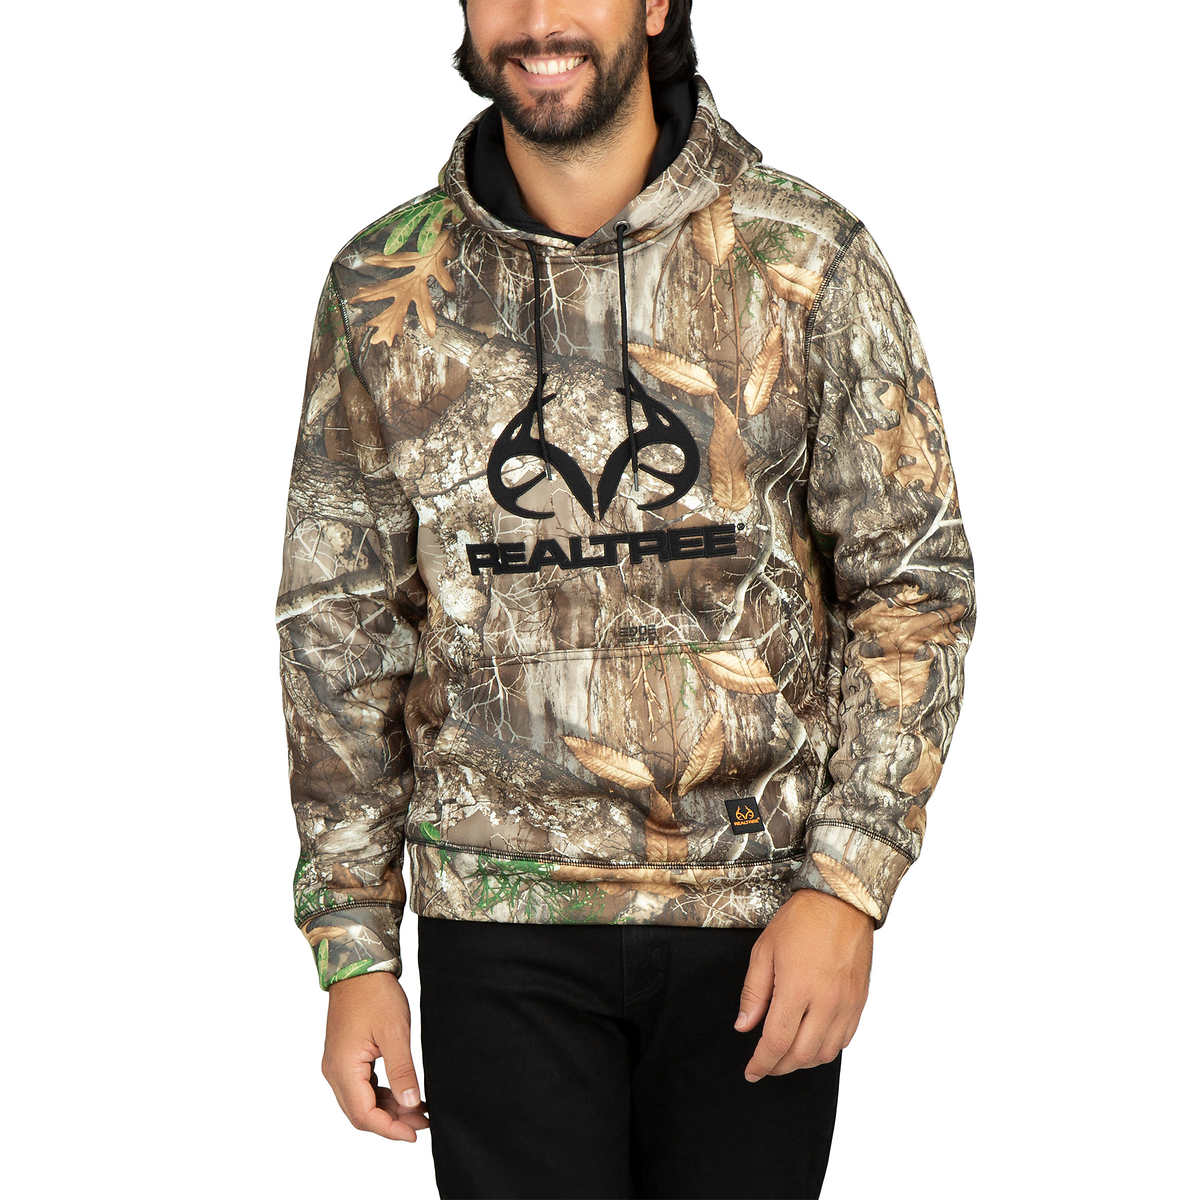 Realtree Business  License the Most Advanced Camo and Brands